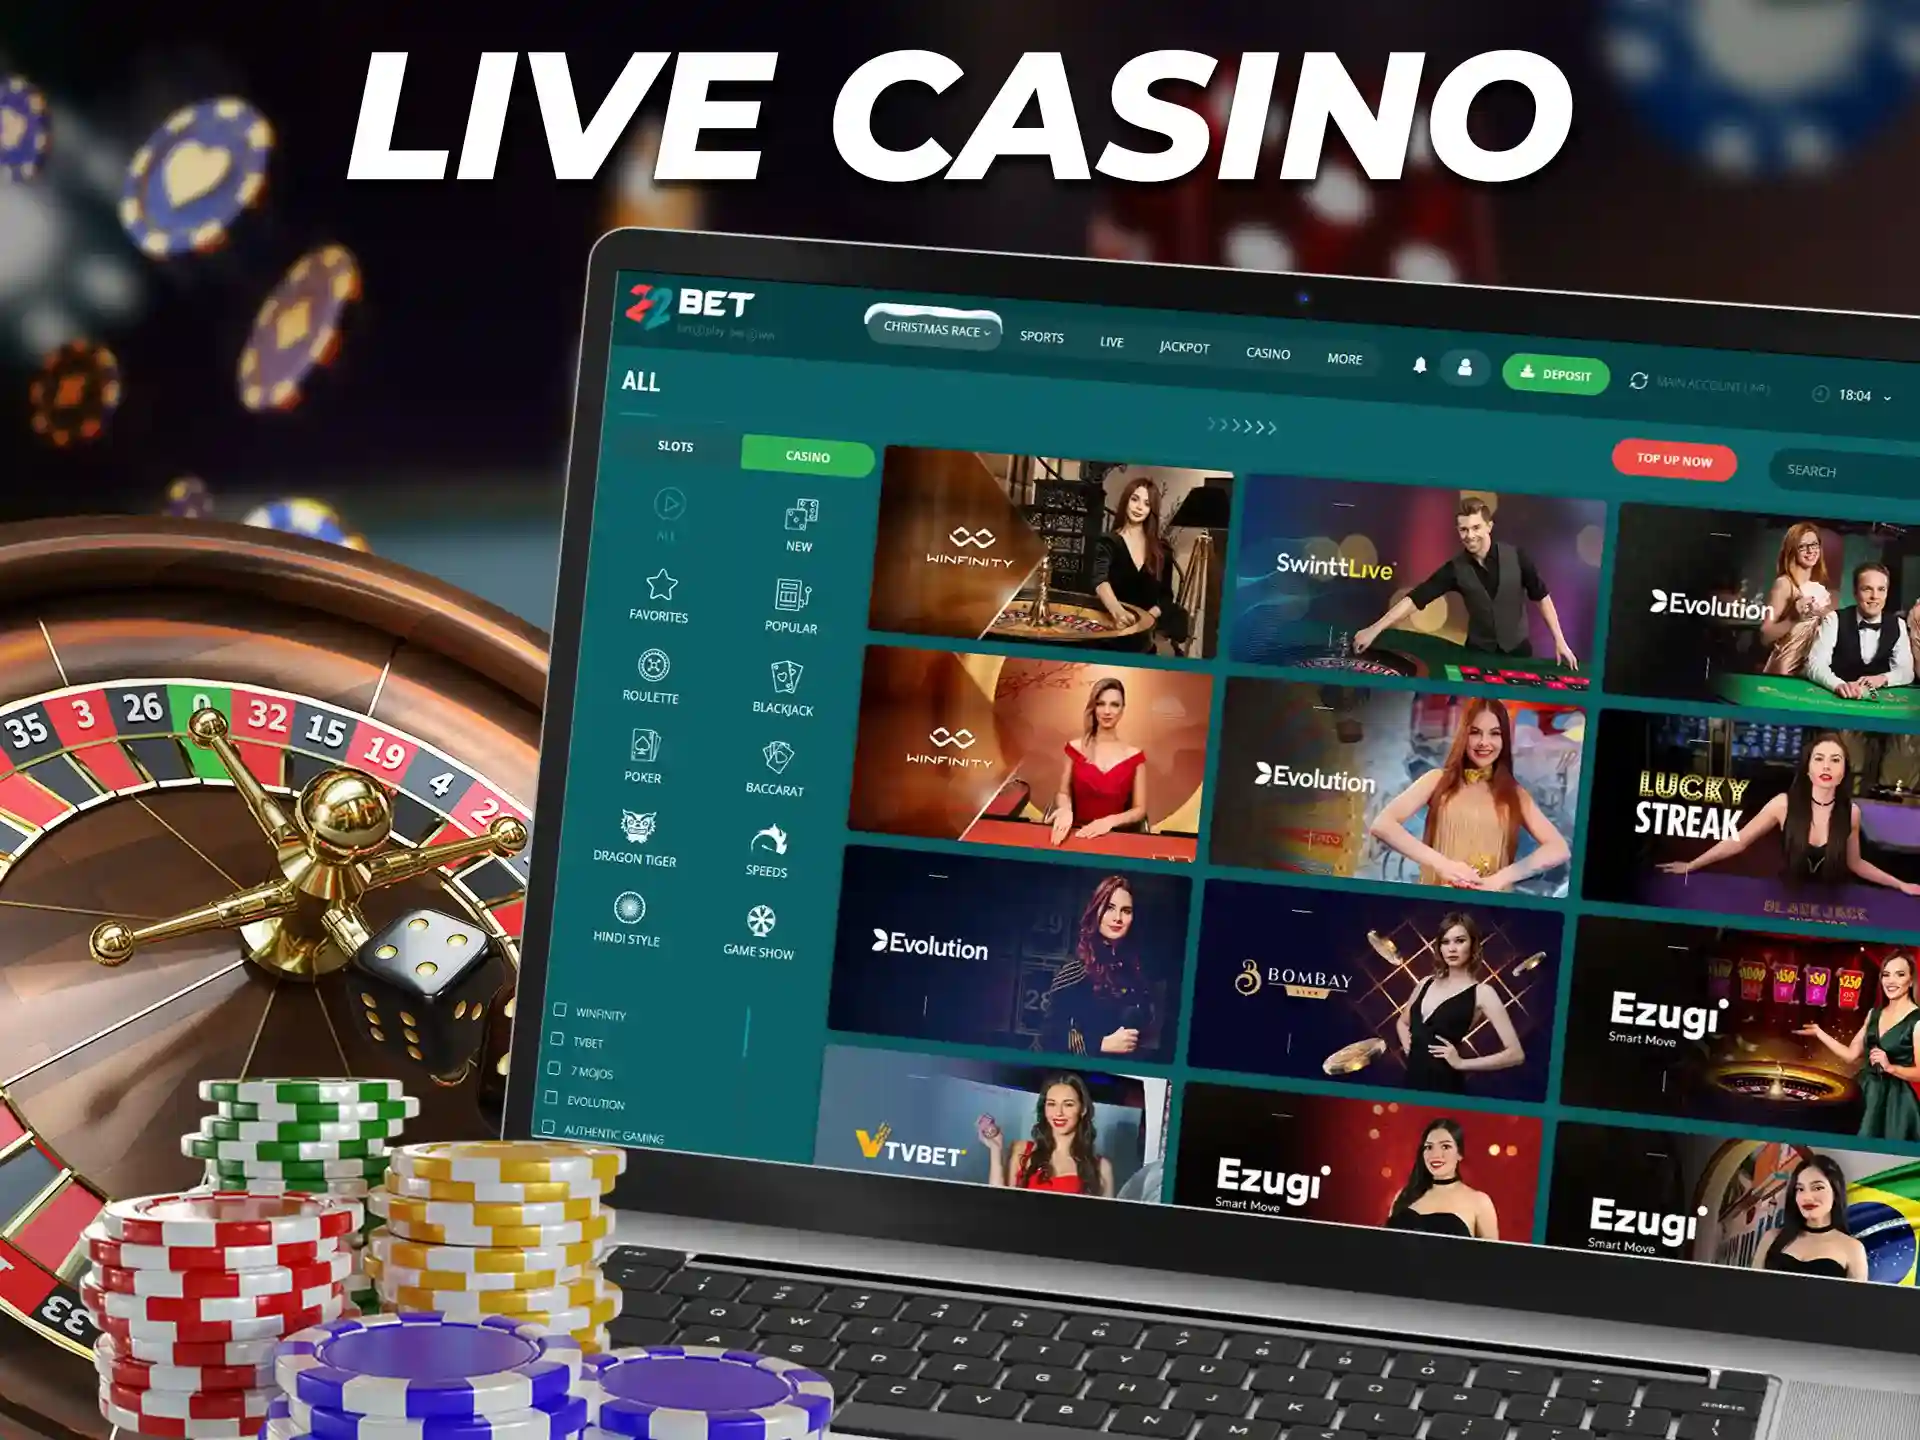 22Bet also offers players to play Live Casino with a live dealer.